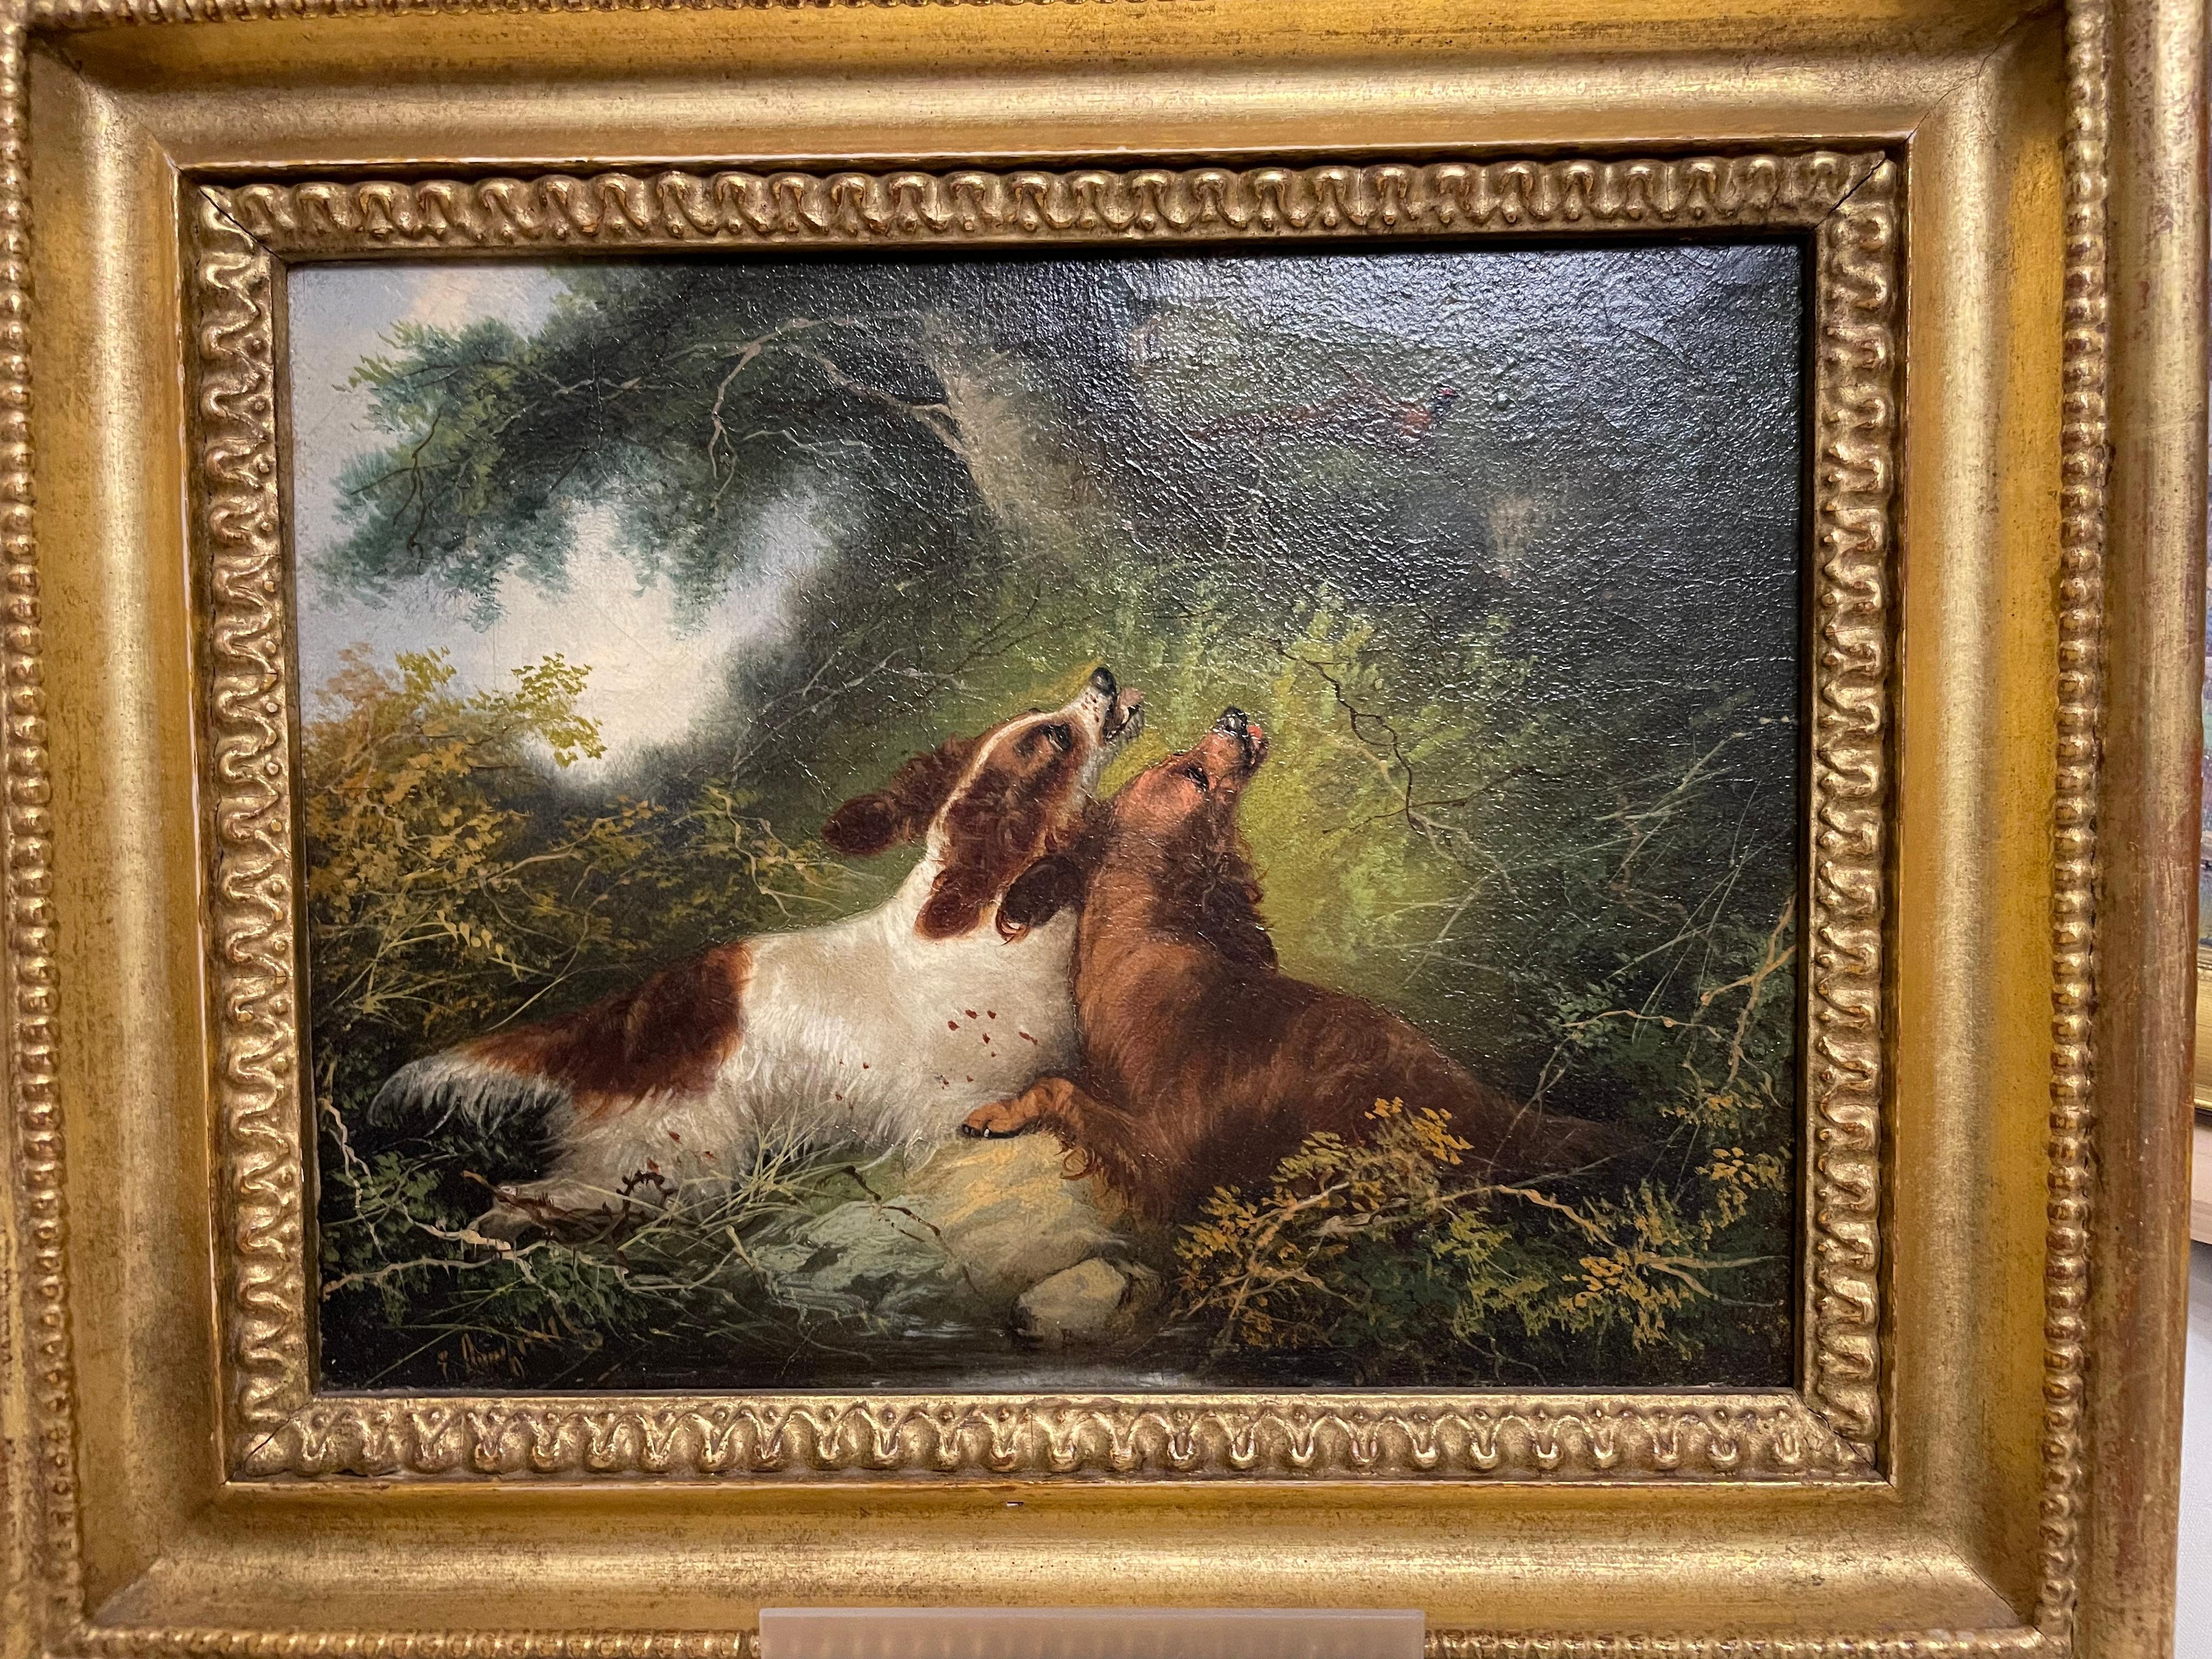 Spaniels Chasing Pheasant - Painting by George Armfield